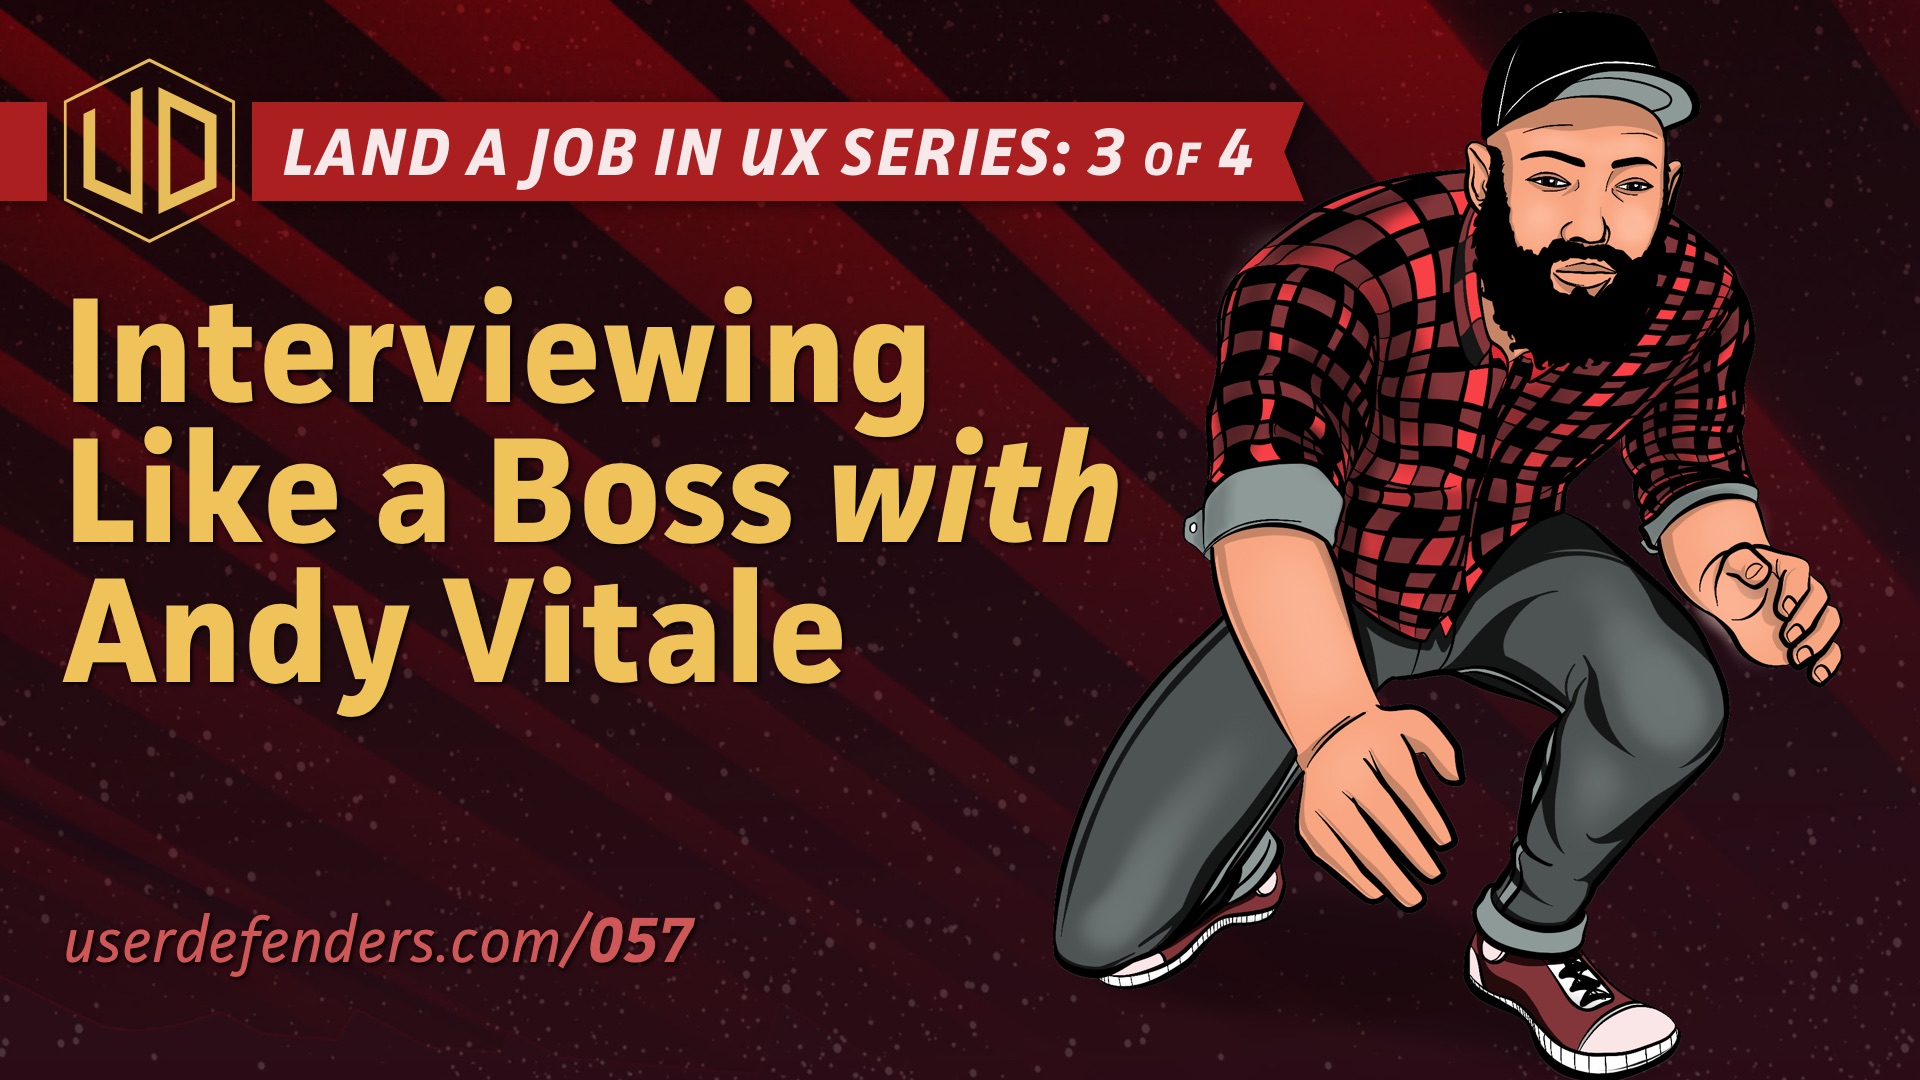 Land a Job in UX Series: User Defenders: Podcast with Andy Vitale on Interviewing Like a Boss